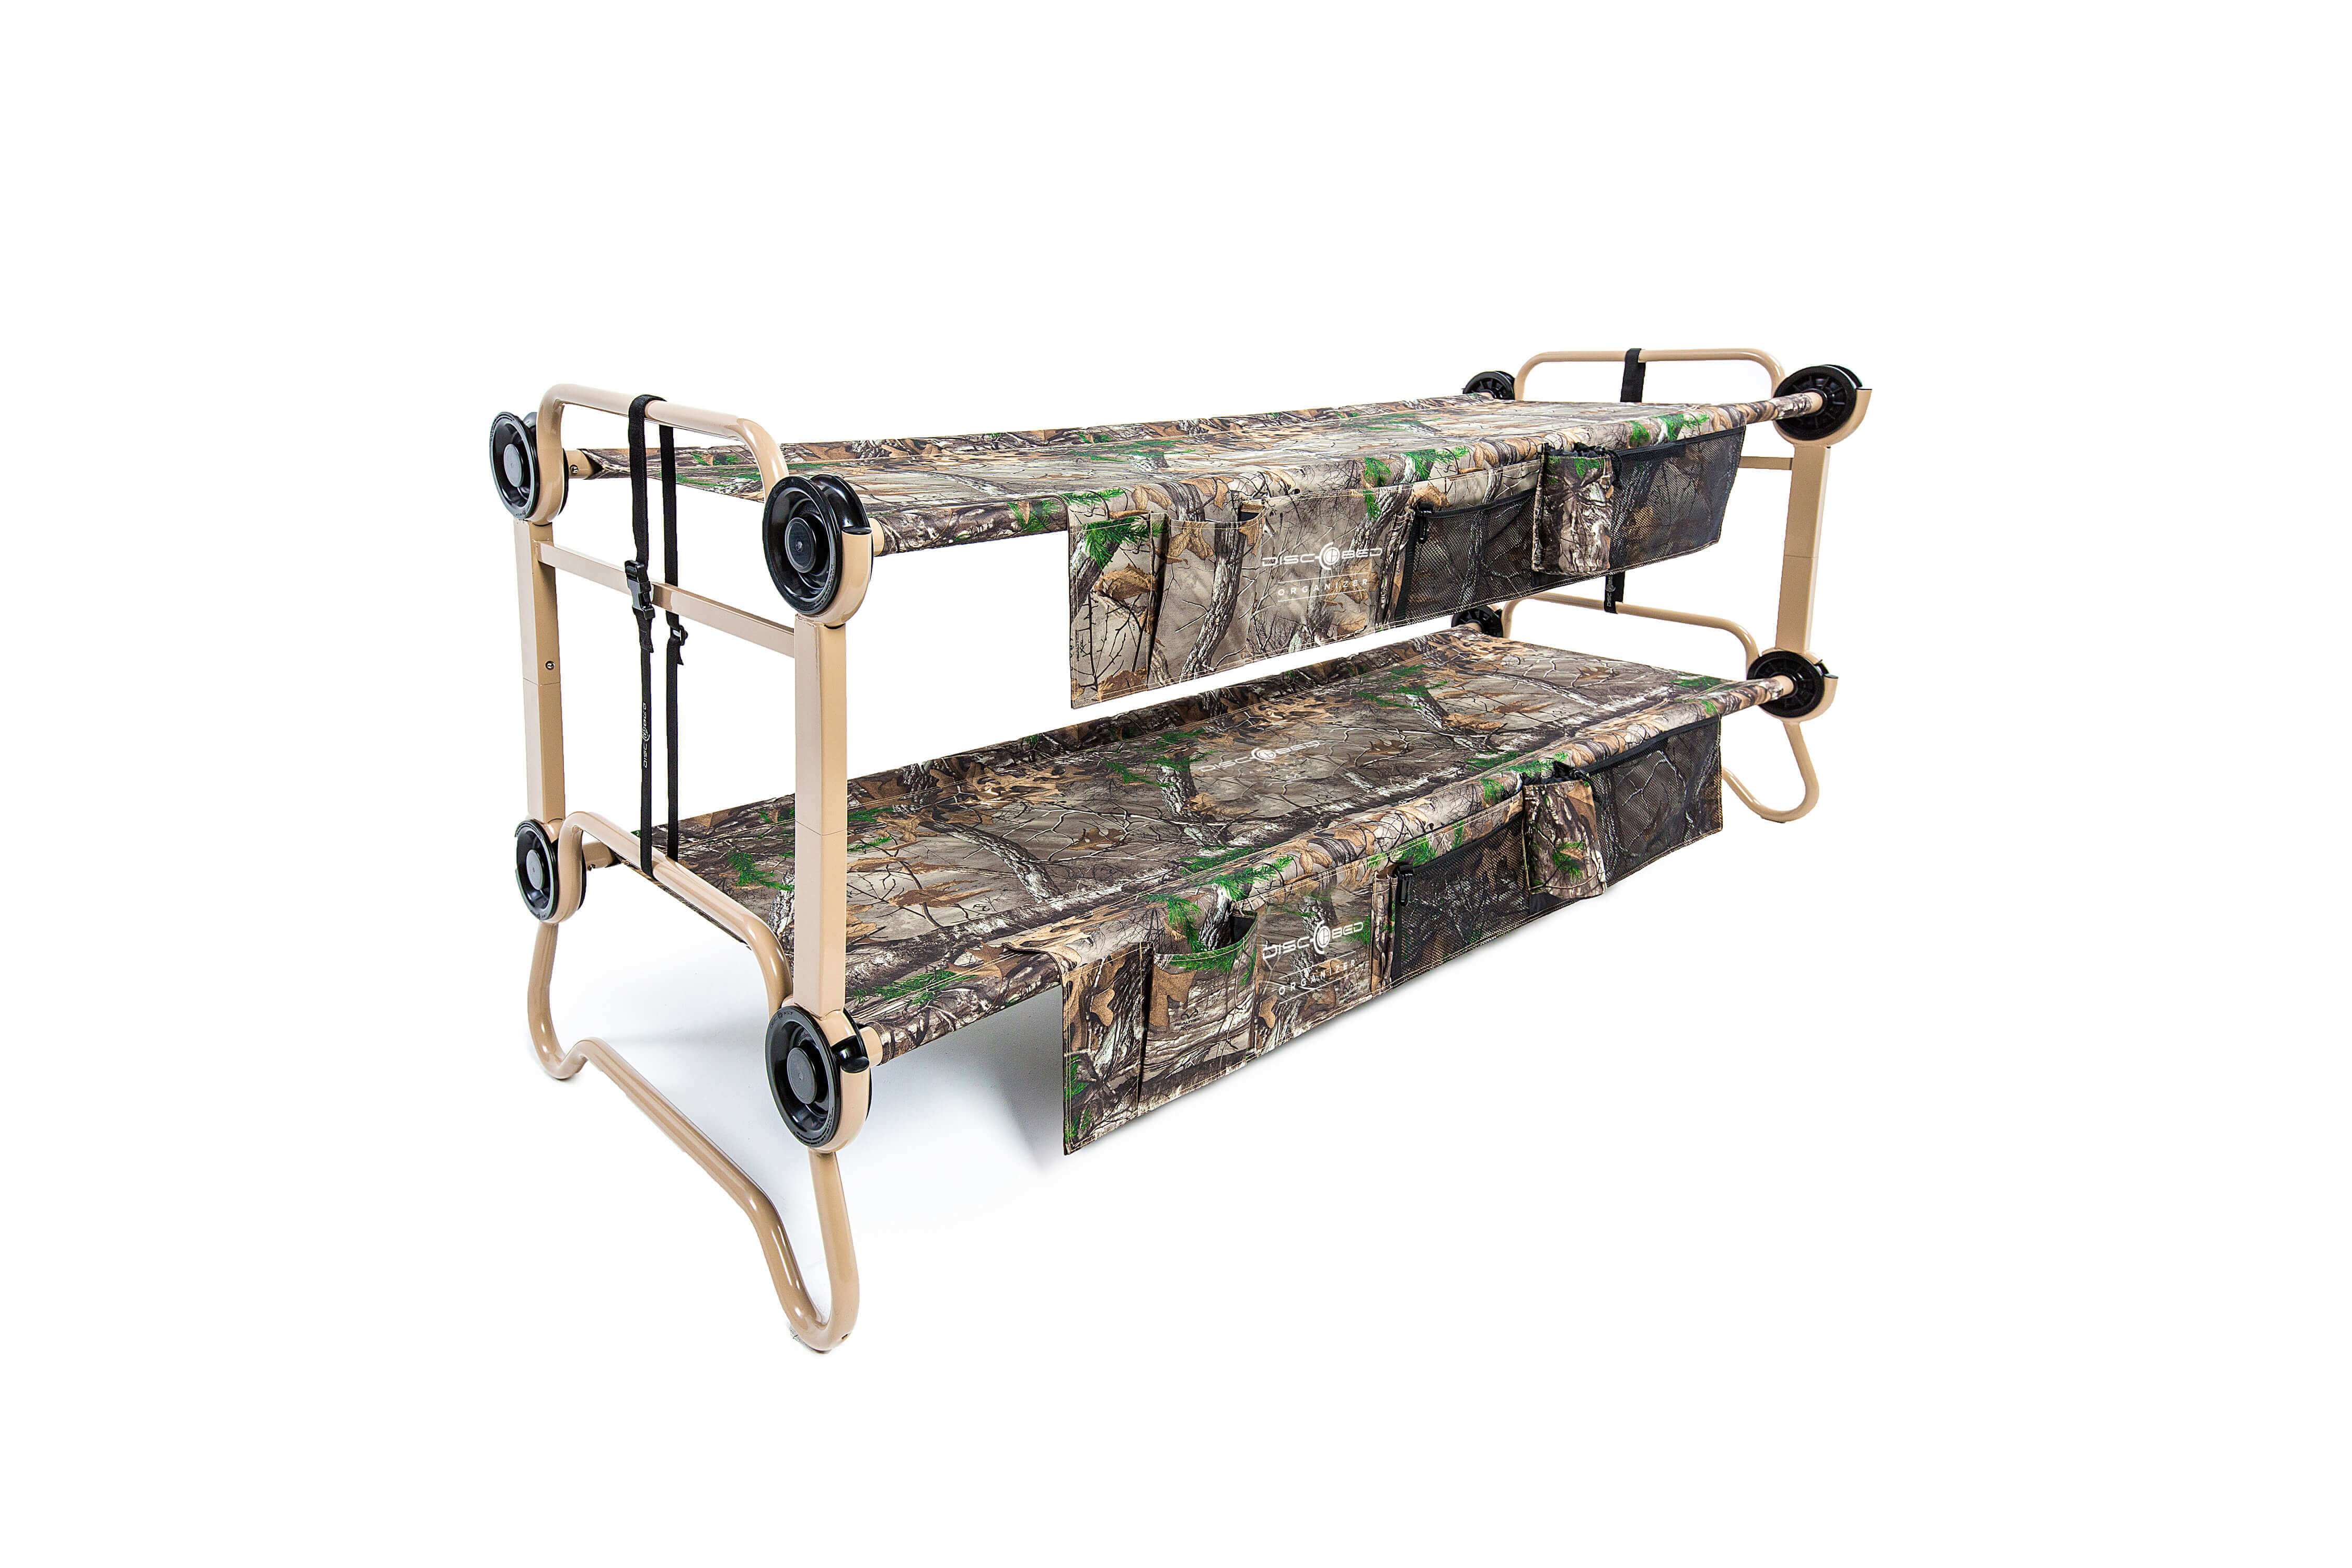 Portable bunk beds double campin bed